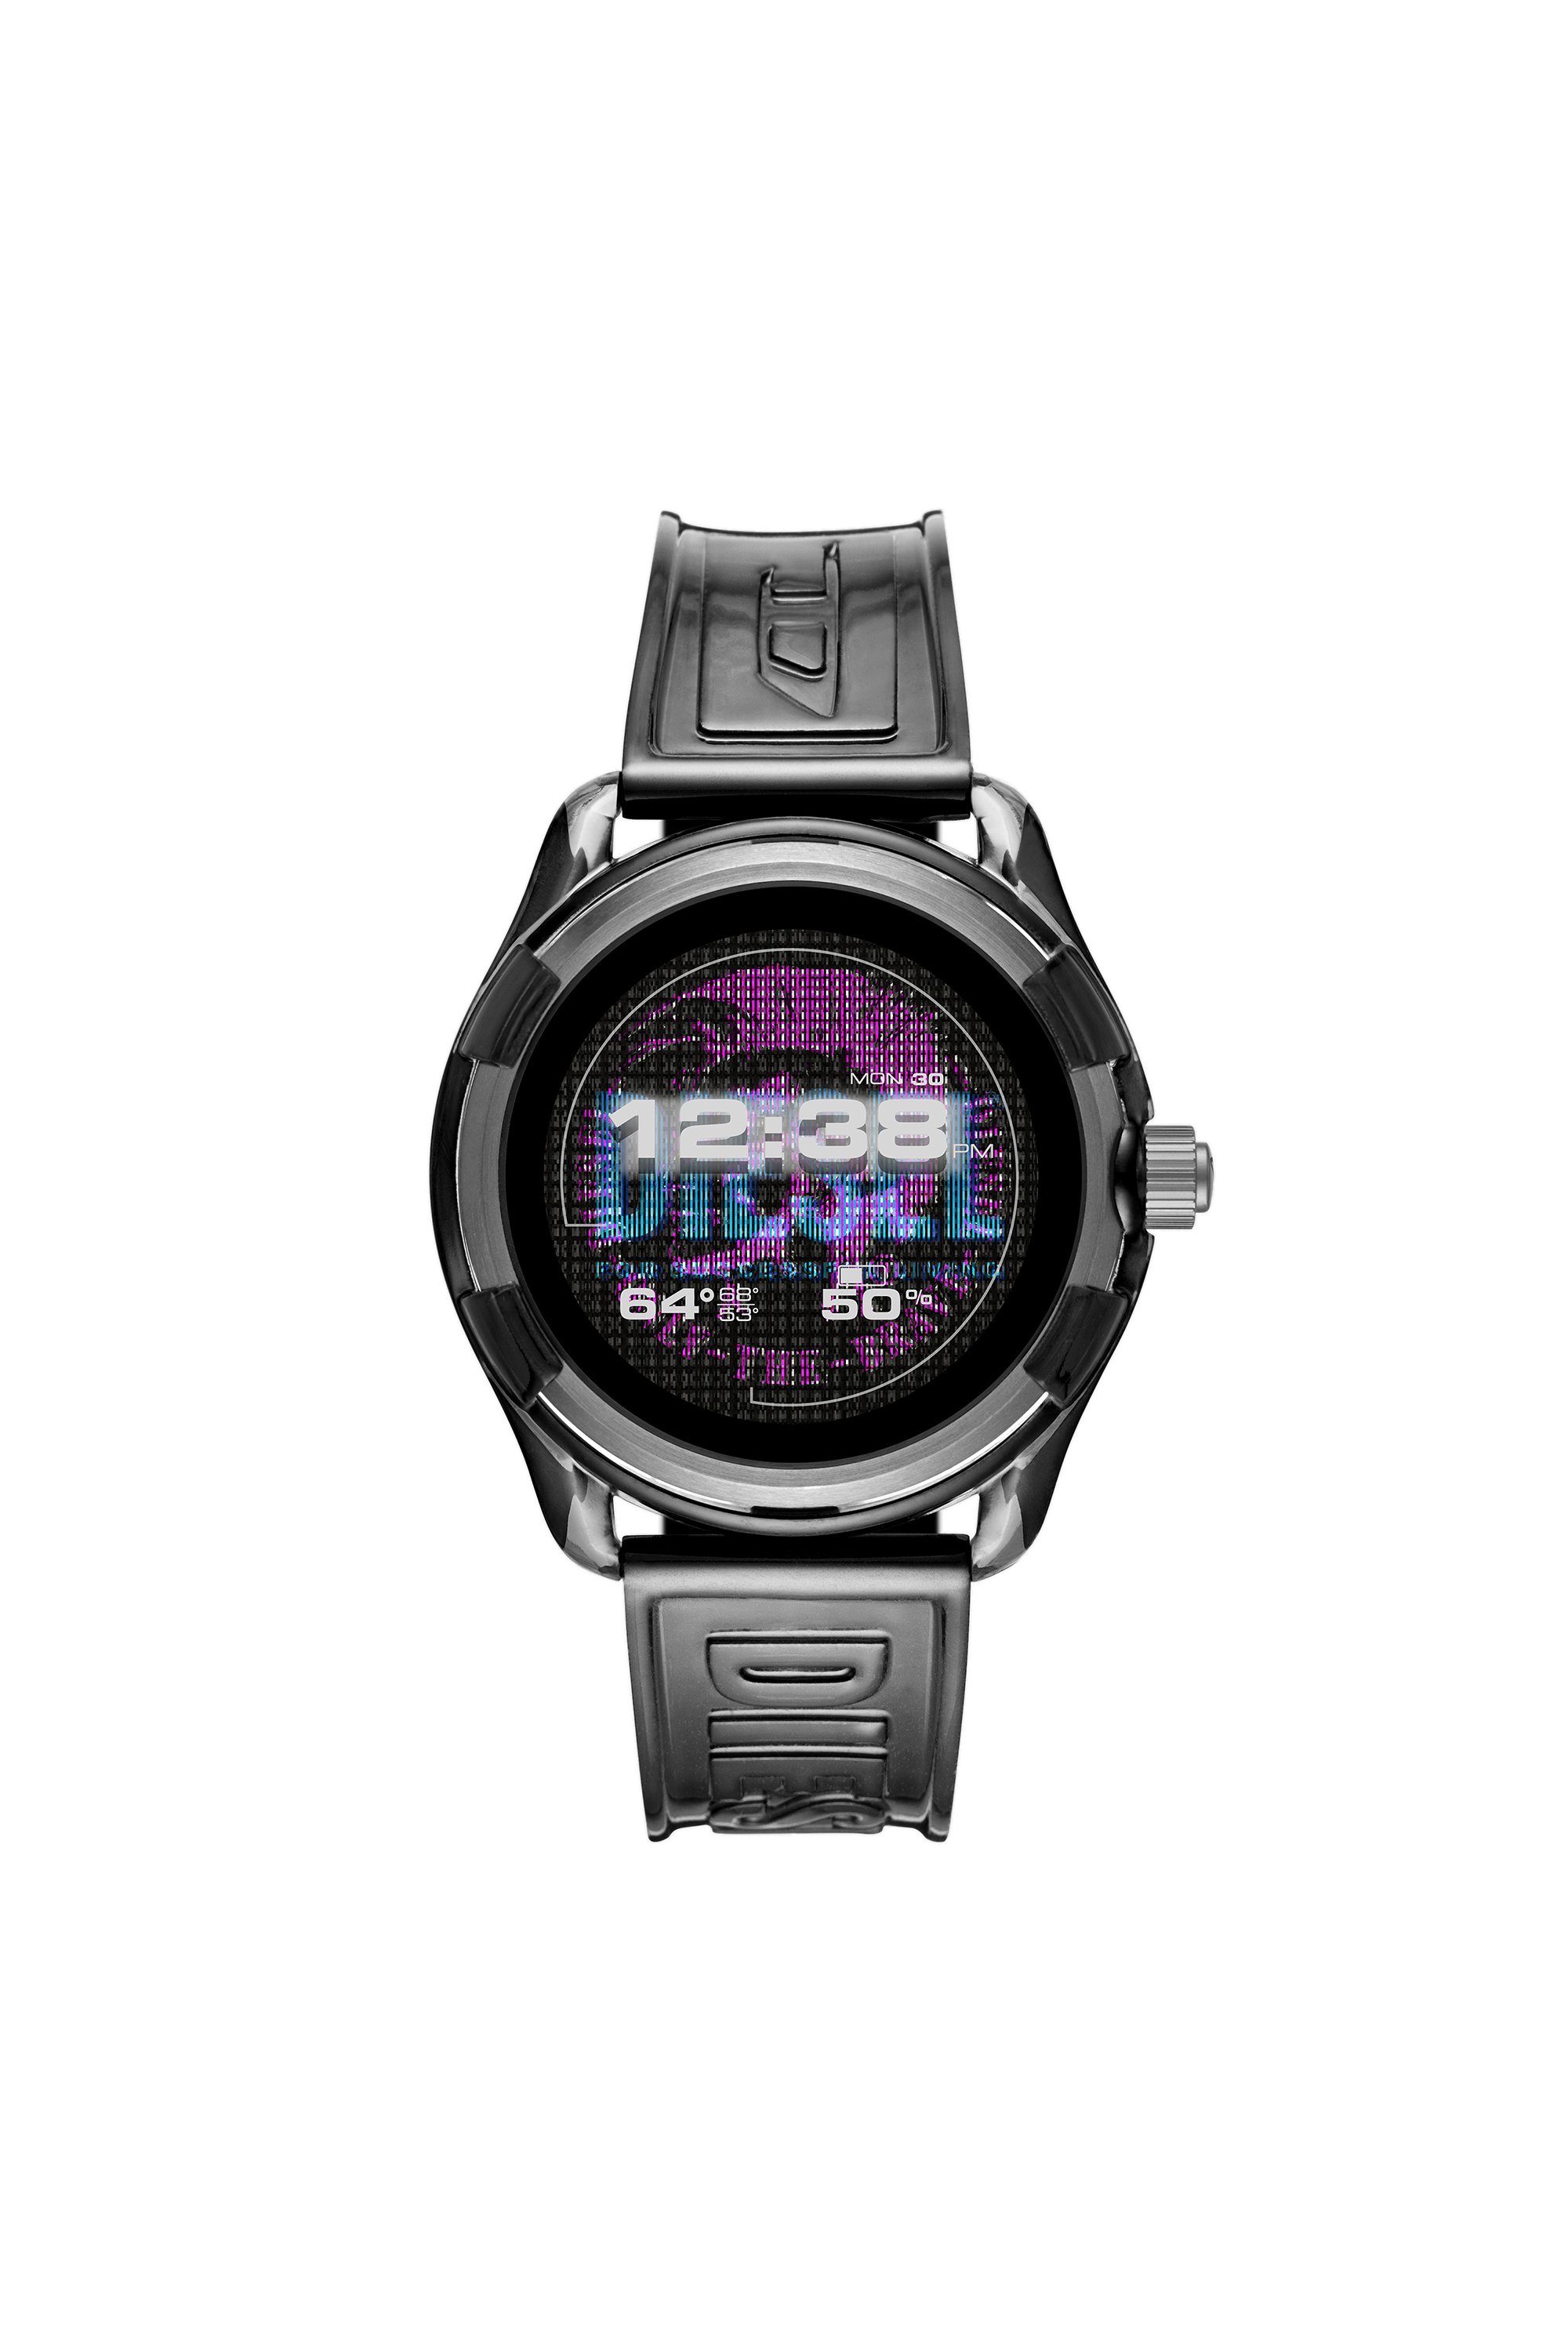 Diesel Smartwatches Learn More Page | Discover more on Diesel.com